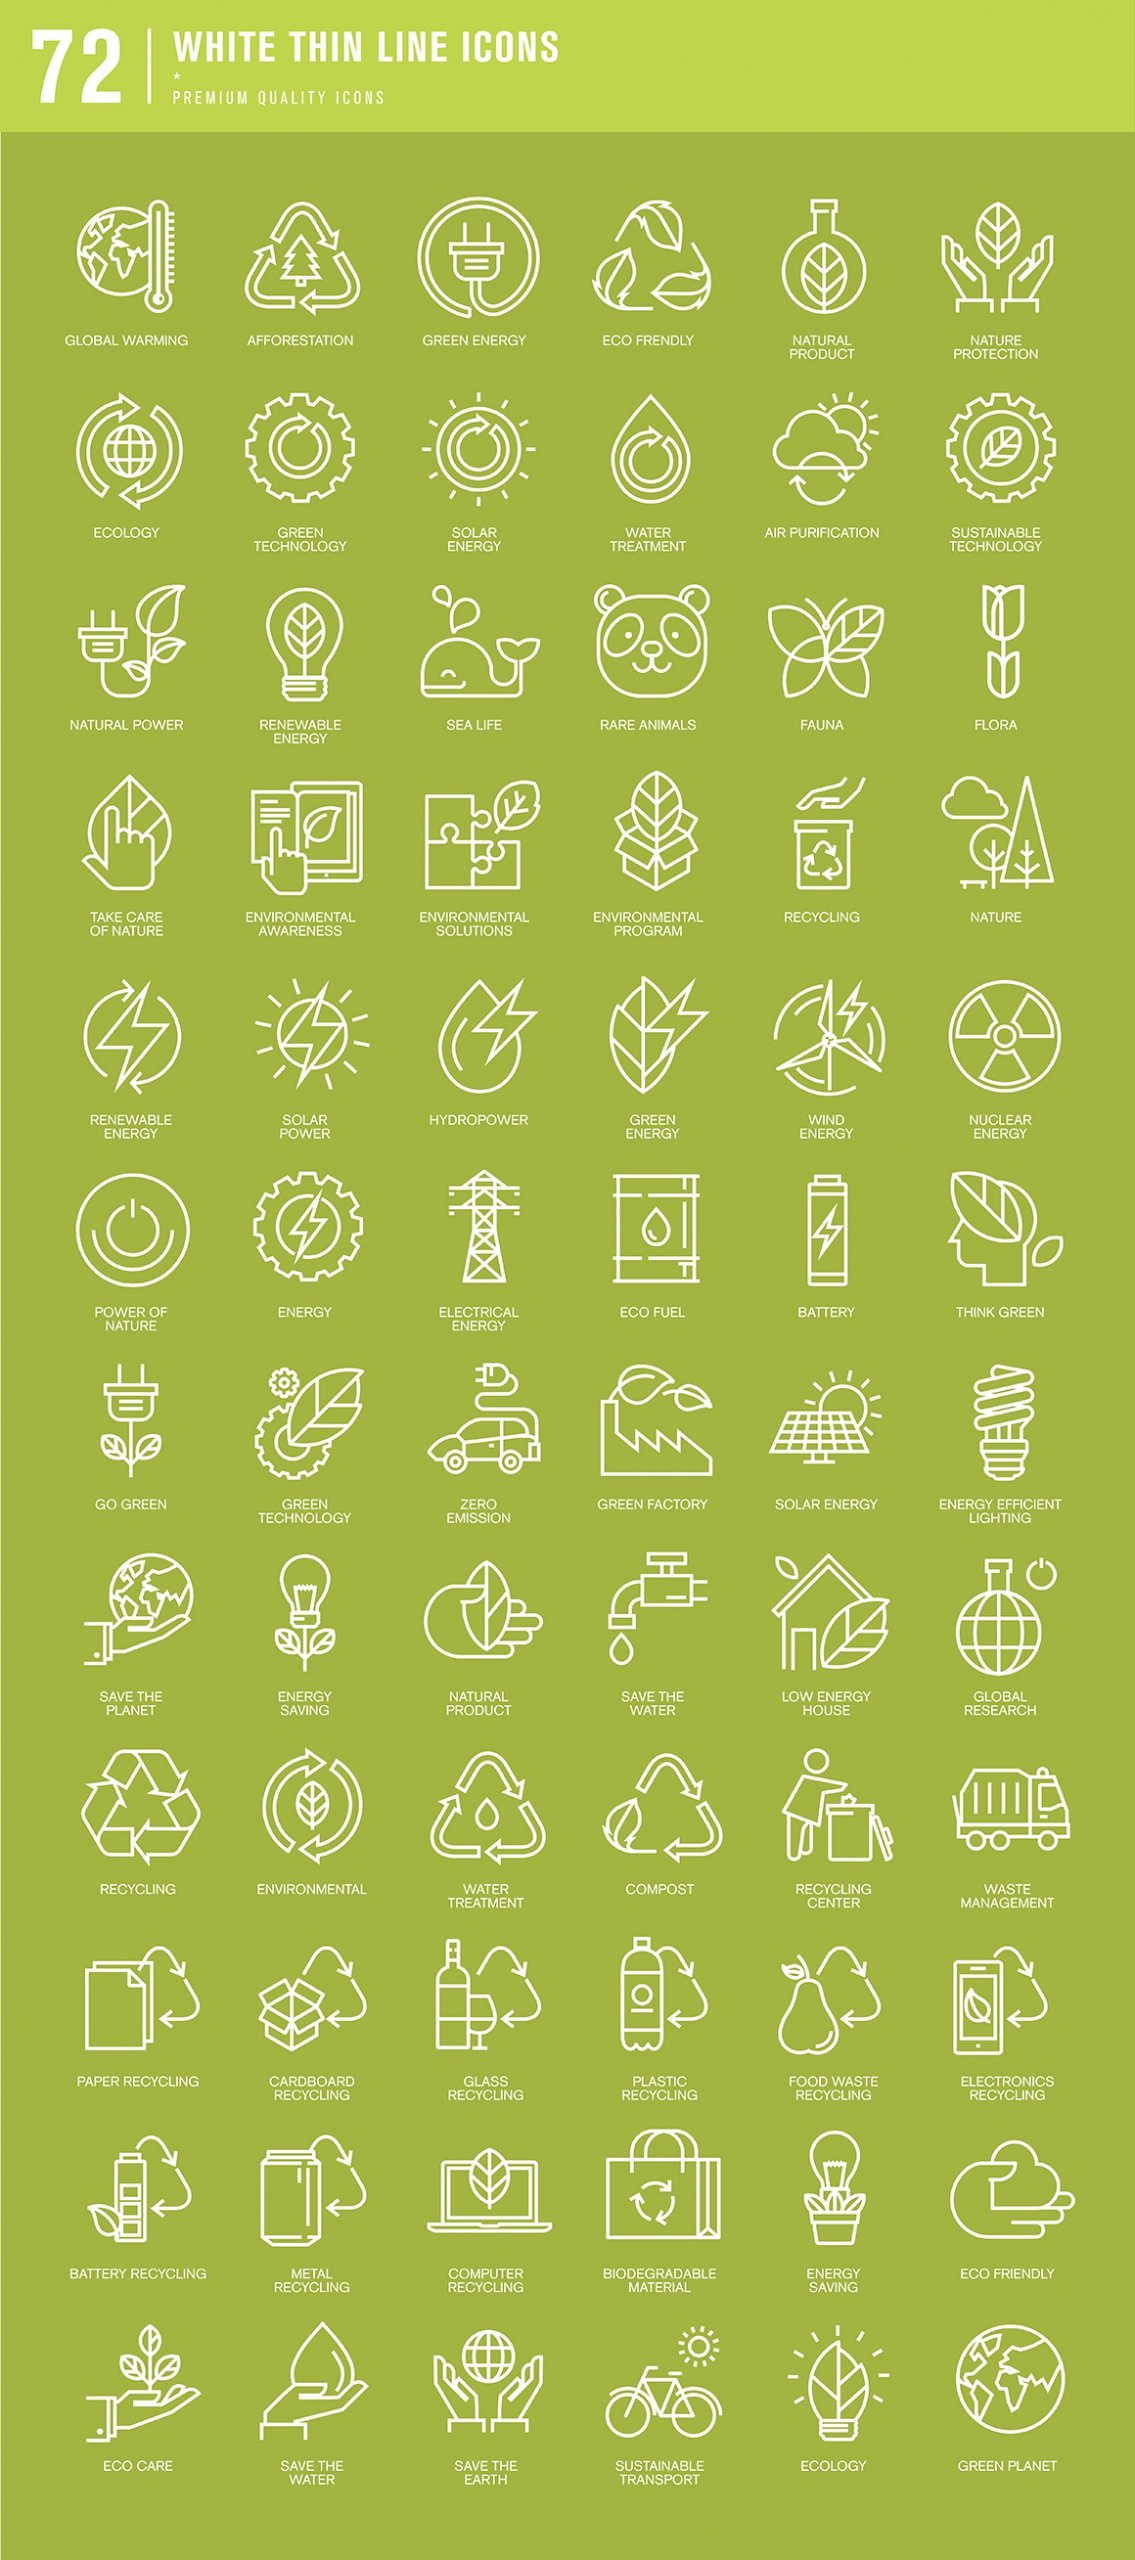 Set of Thin Line Icons for Green Technology